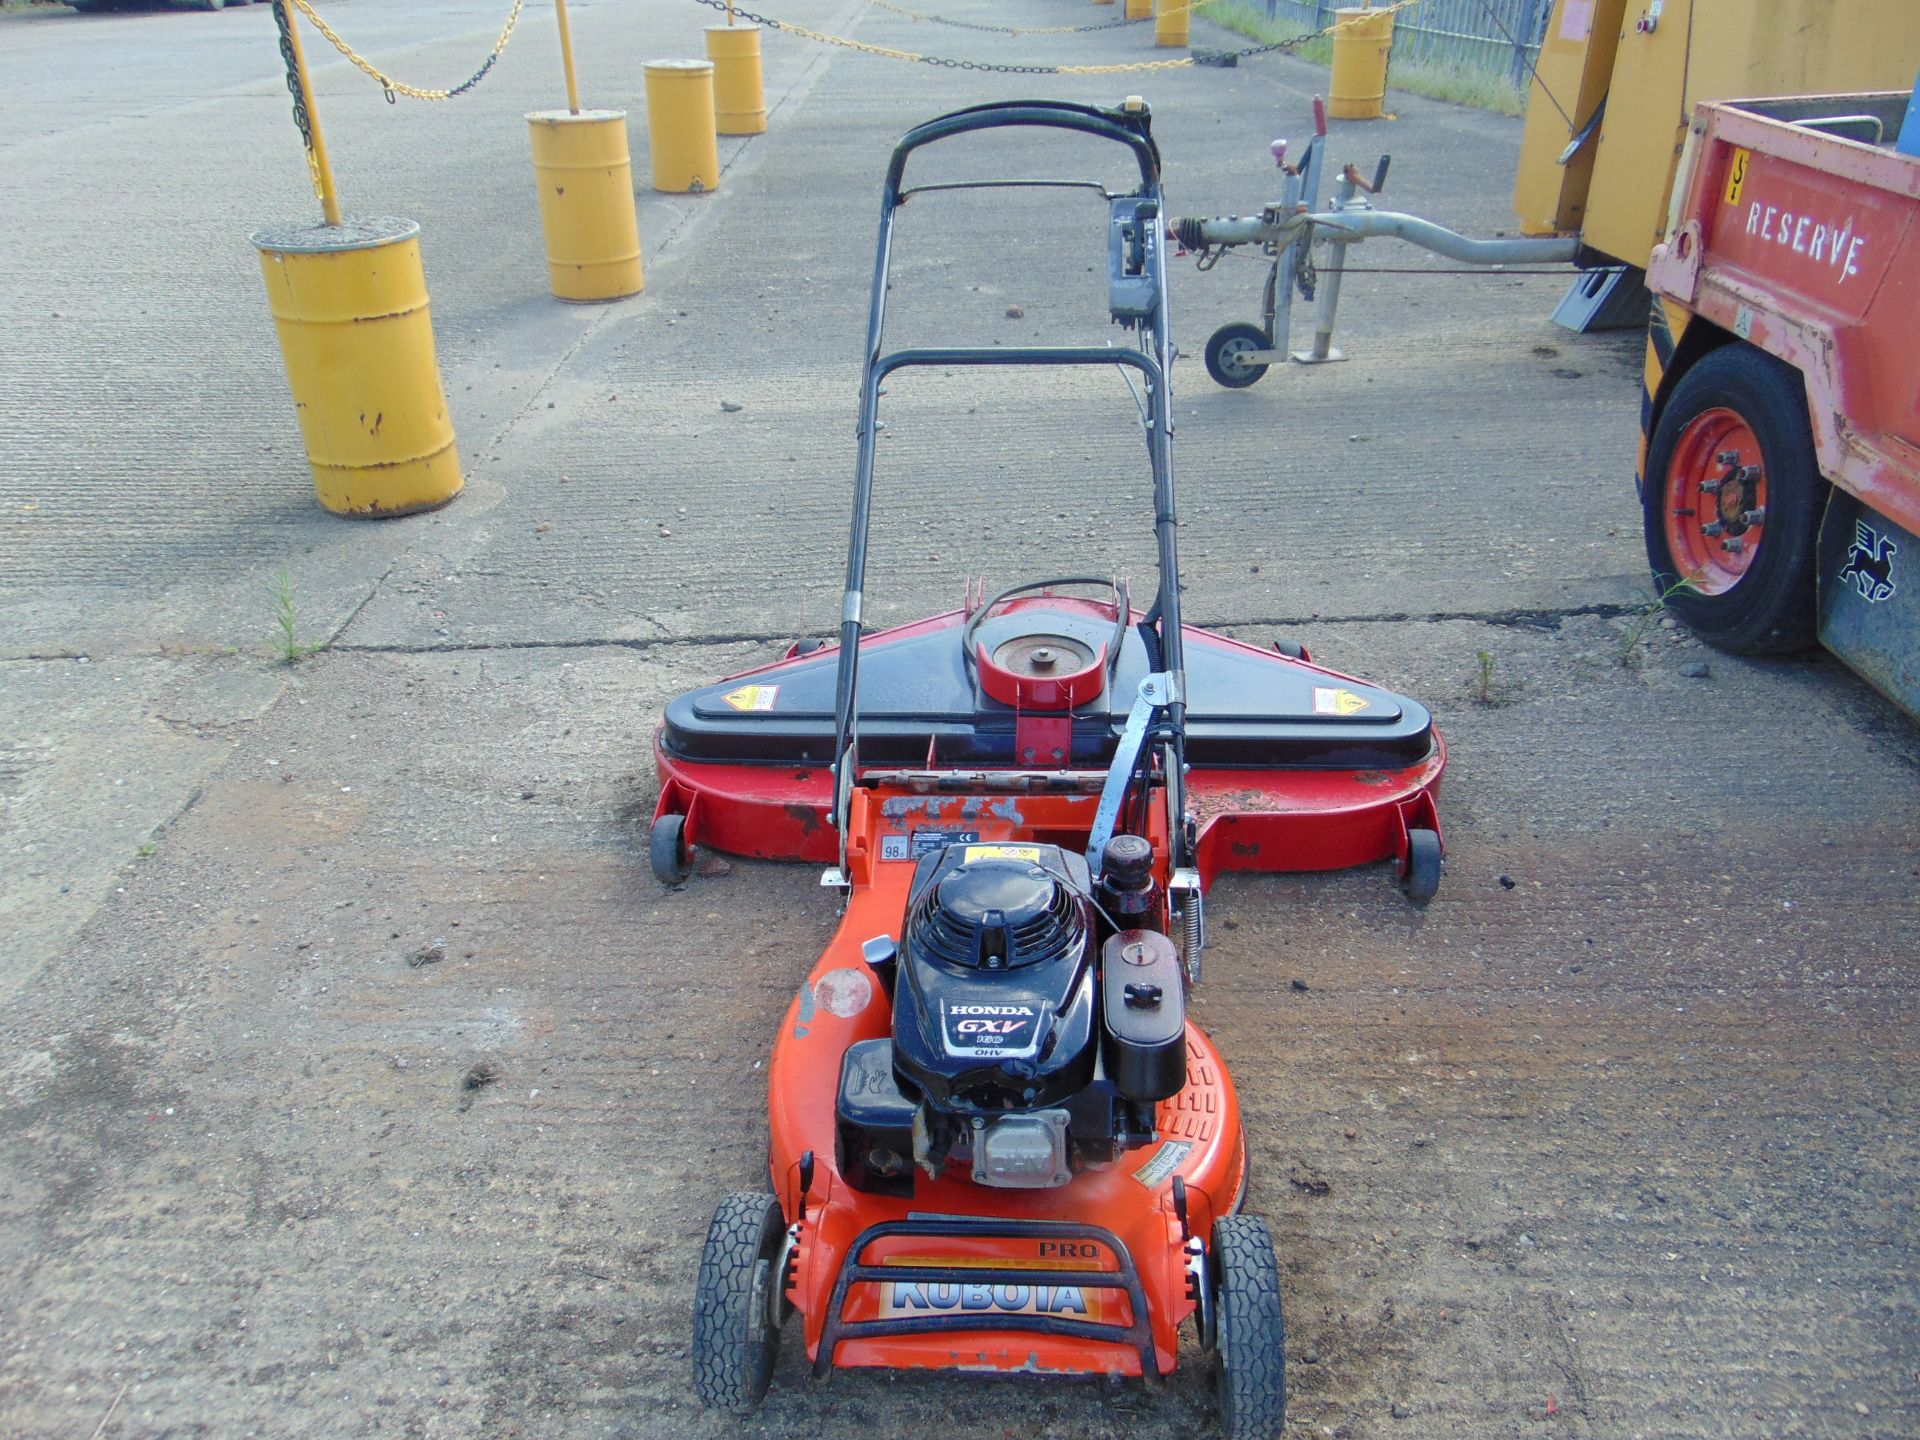 KUBOTA MOWER PLUS COUNTAX 48 INCHES MOWER DECK FROM COUNTY COUNCIL - Image 3 of 6